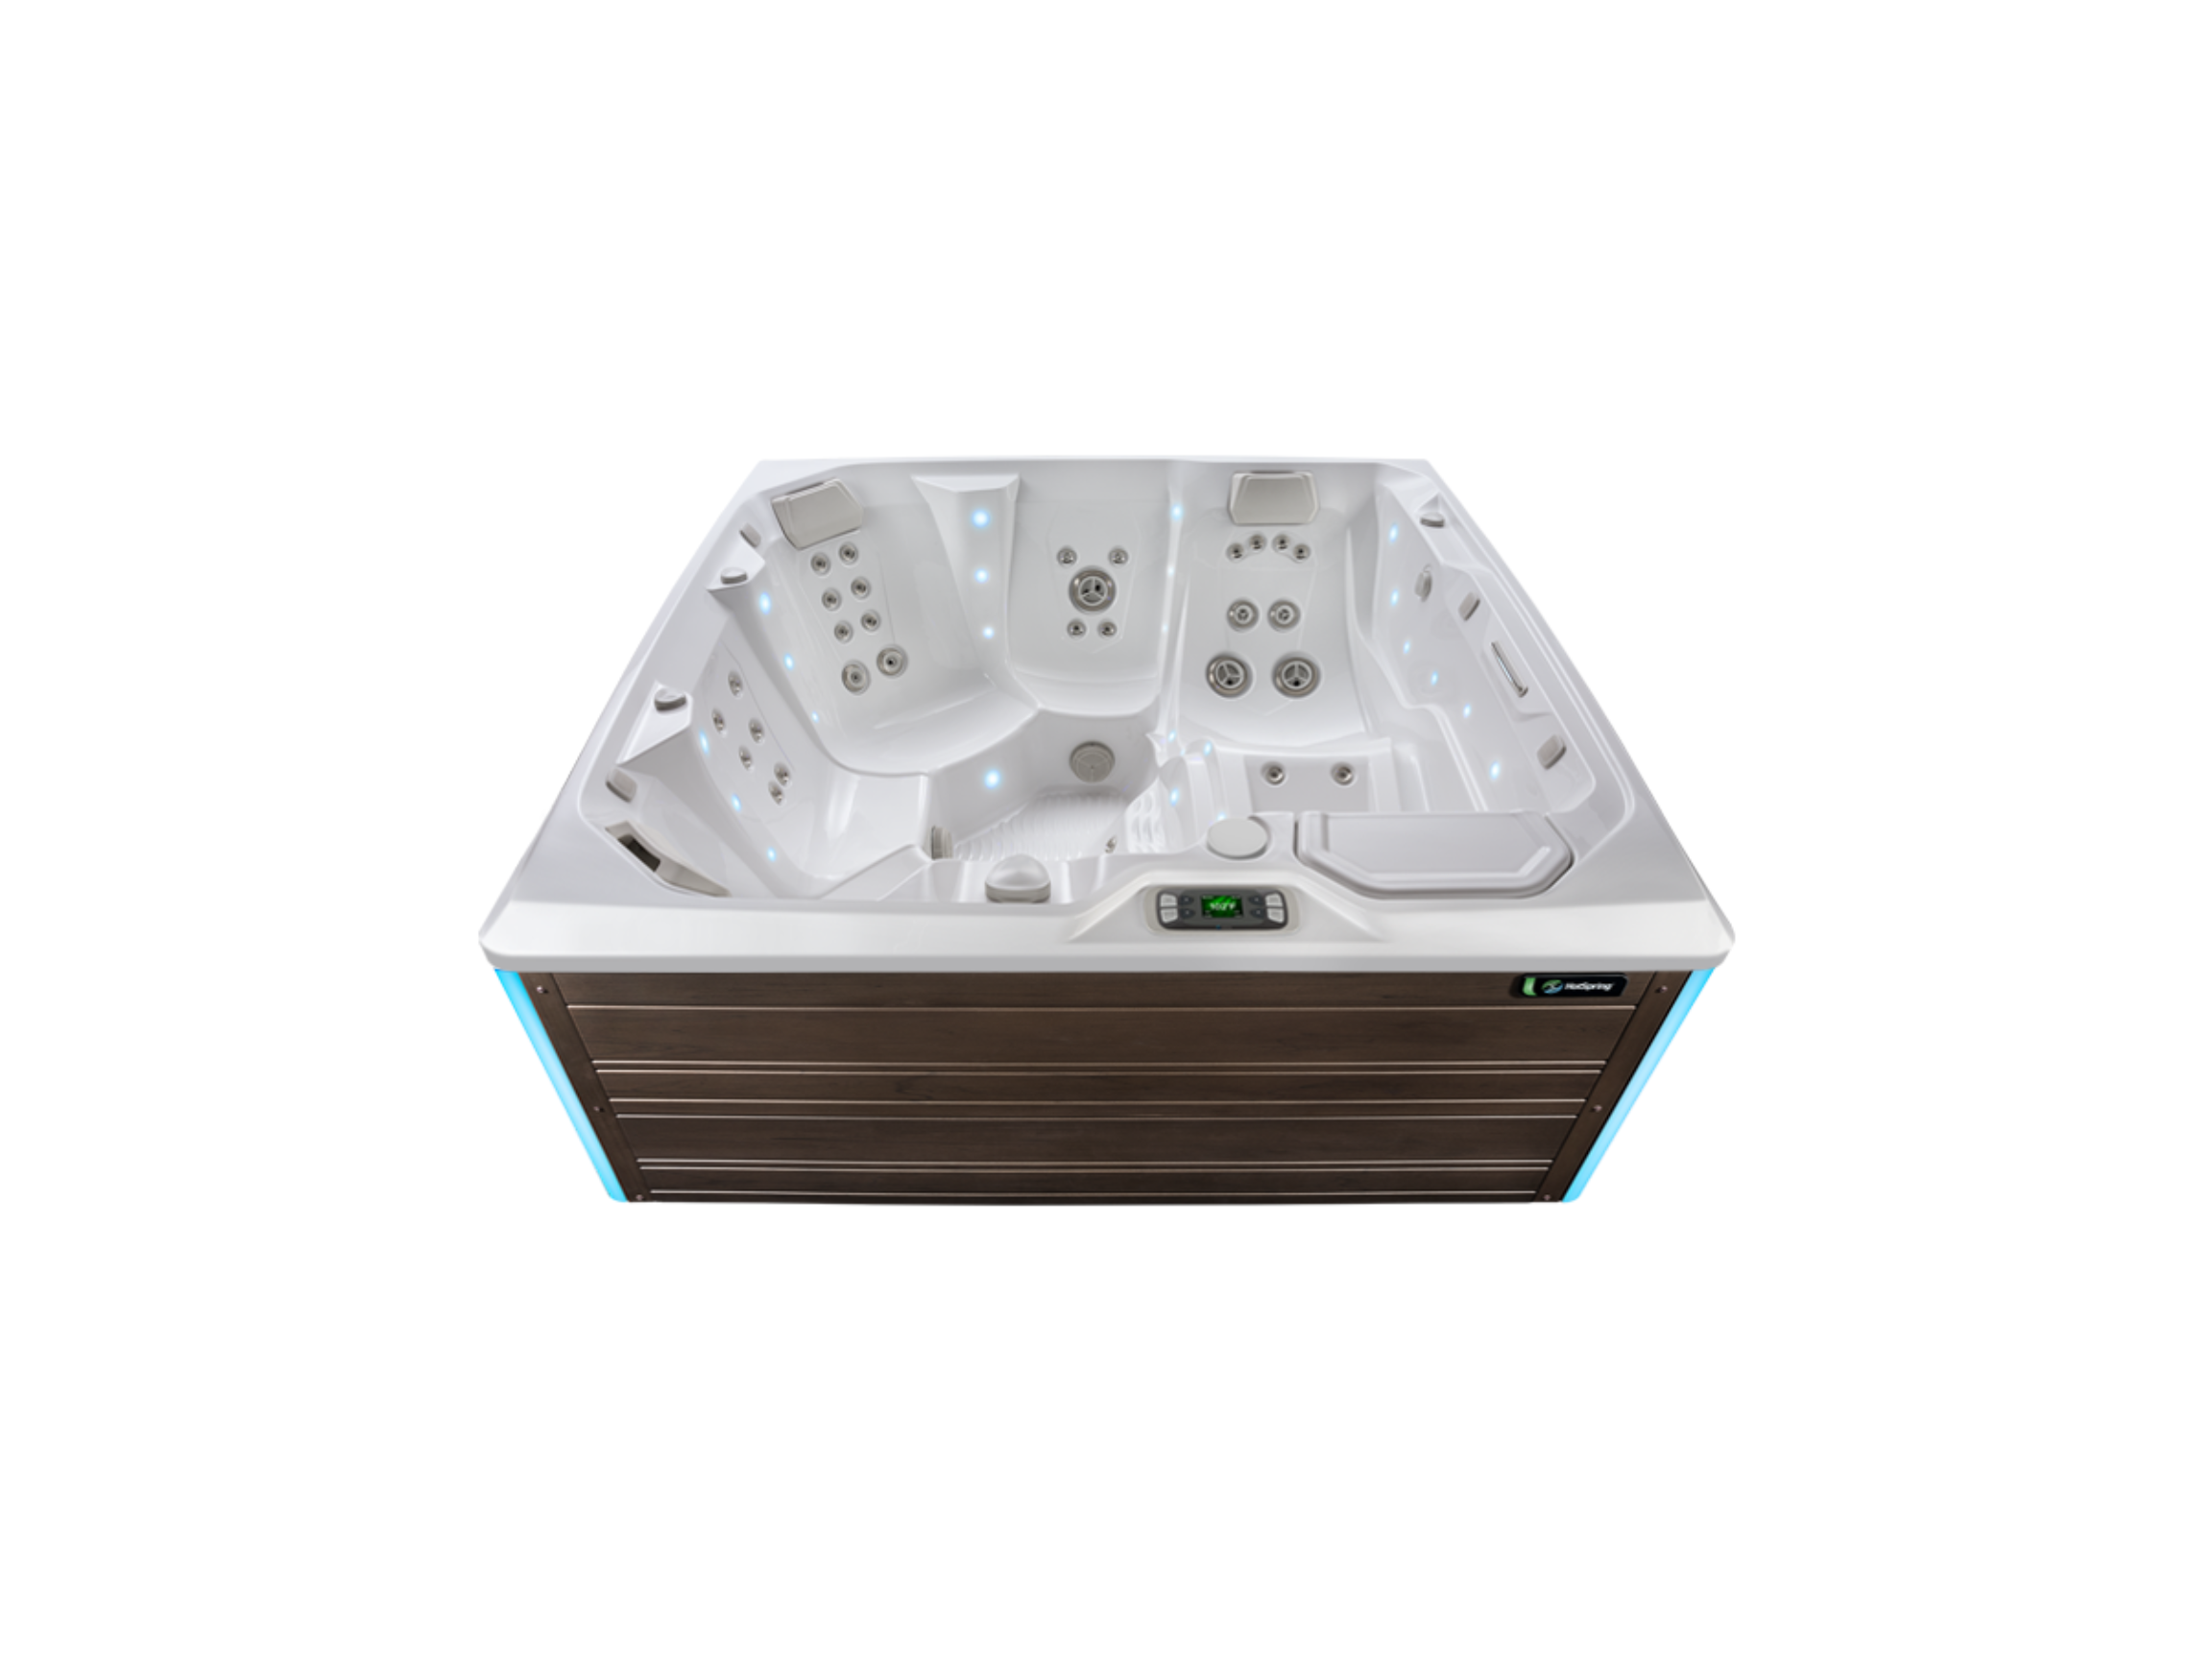 hot spring flair hot tub alpine white shell espresso cabinet in stock